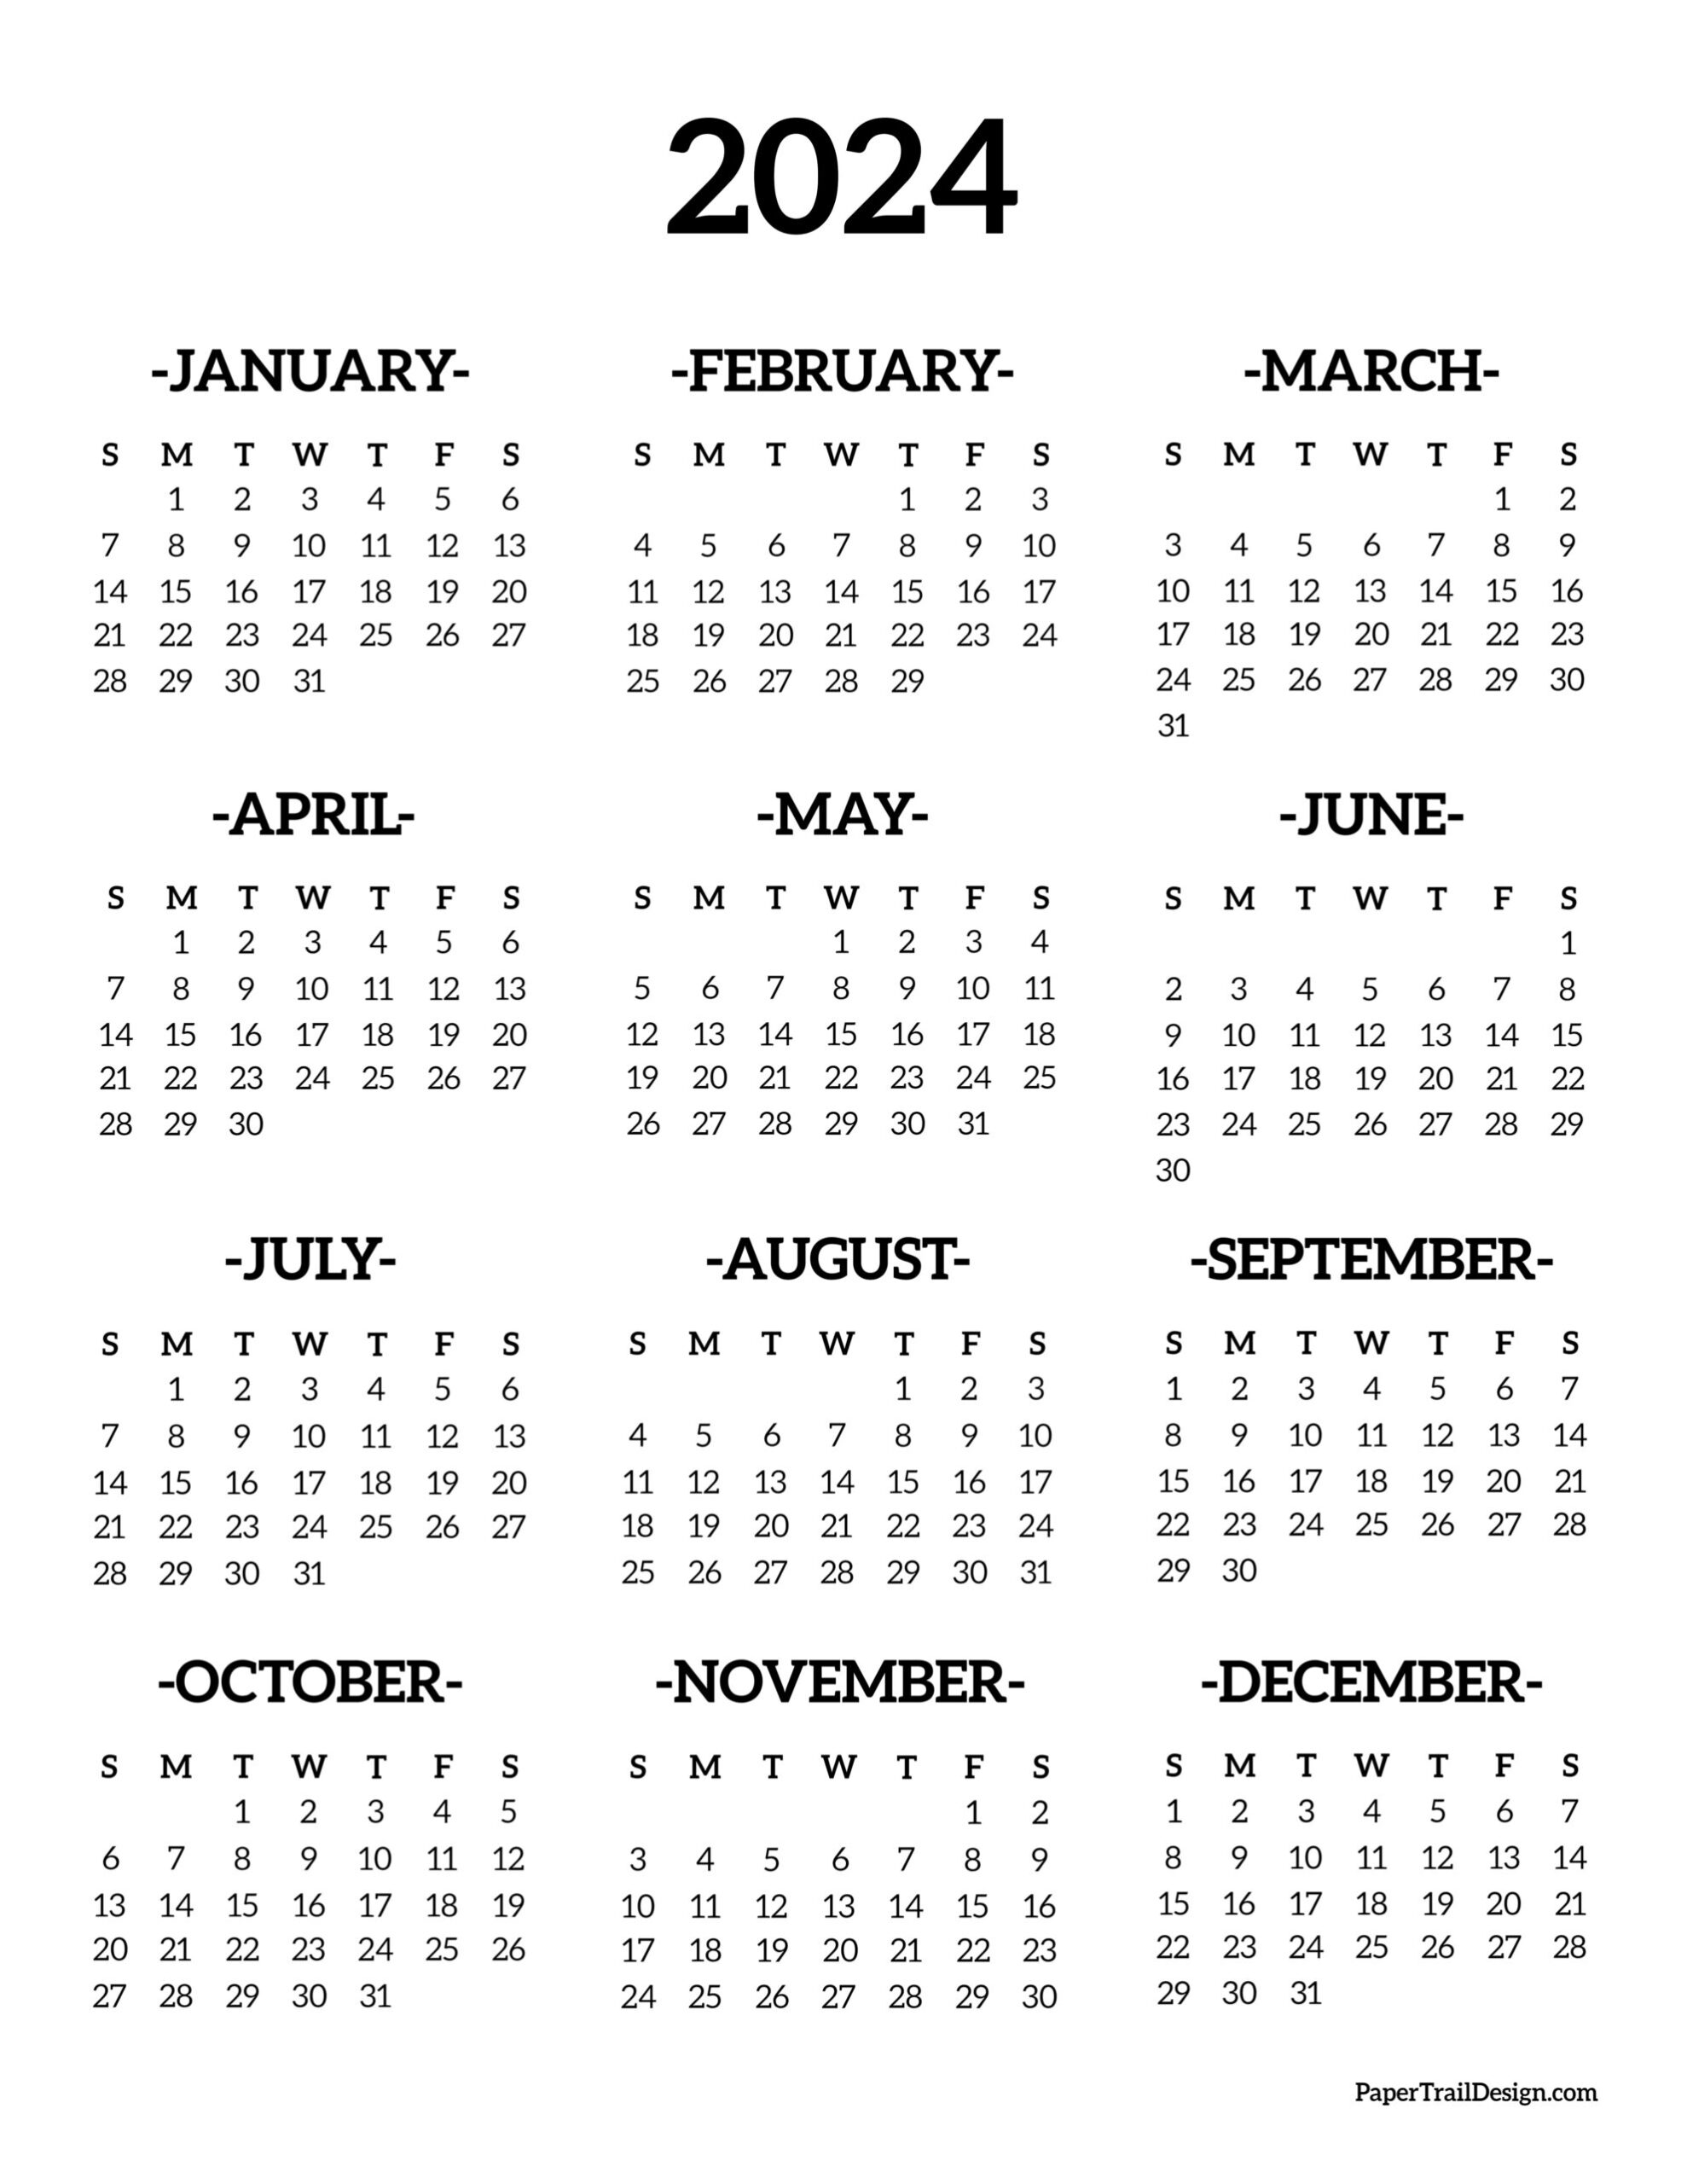 Calendar 2024 Printable One Page - Paper Trail Design for 2024 Calendar Yearly Printable